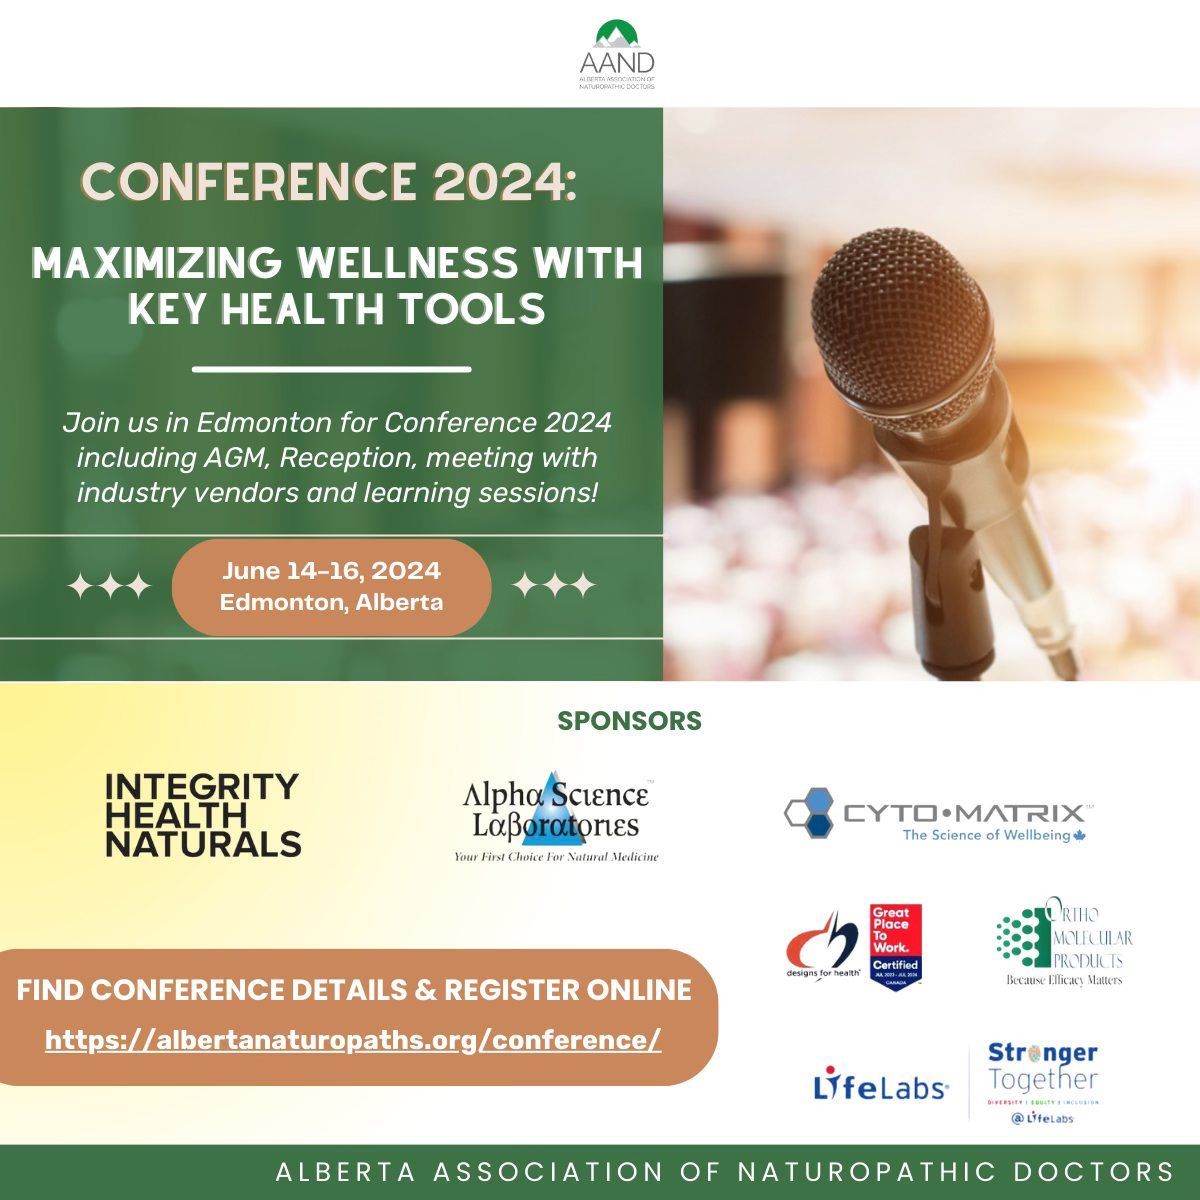 Conference 2024: Maximizing Wellness with Key Health Tools